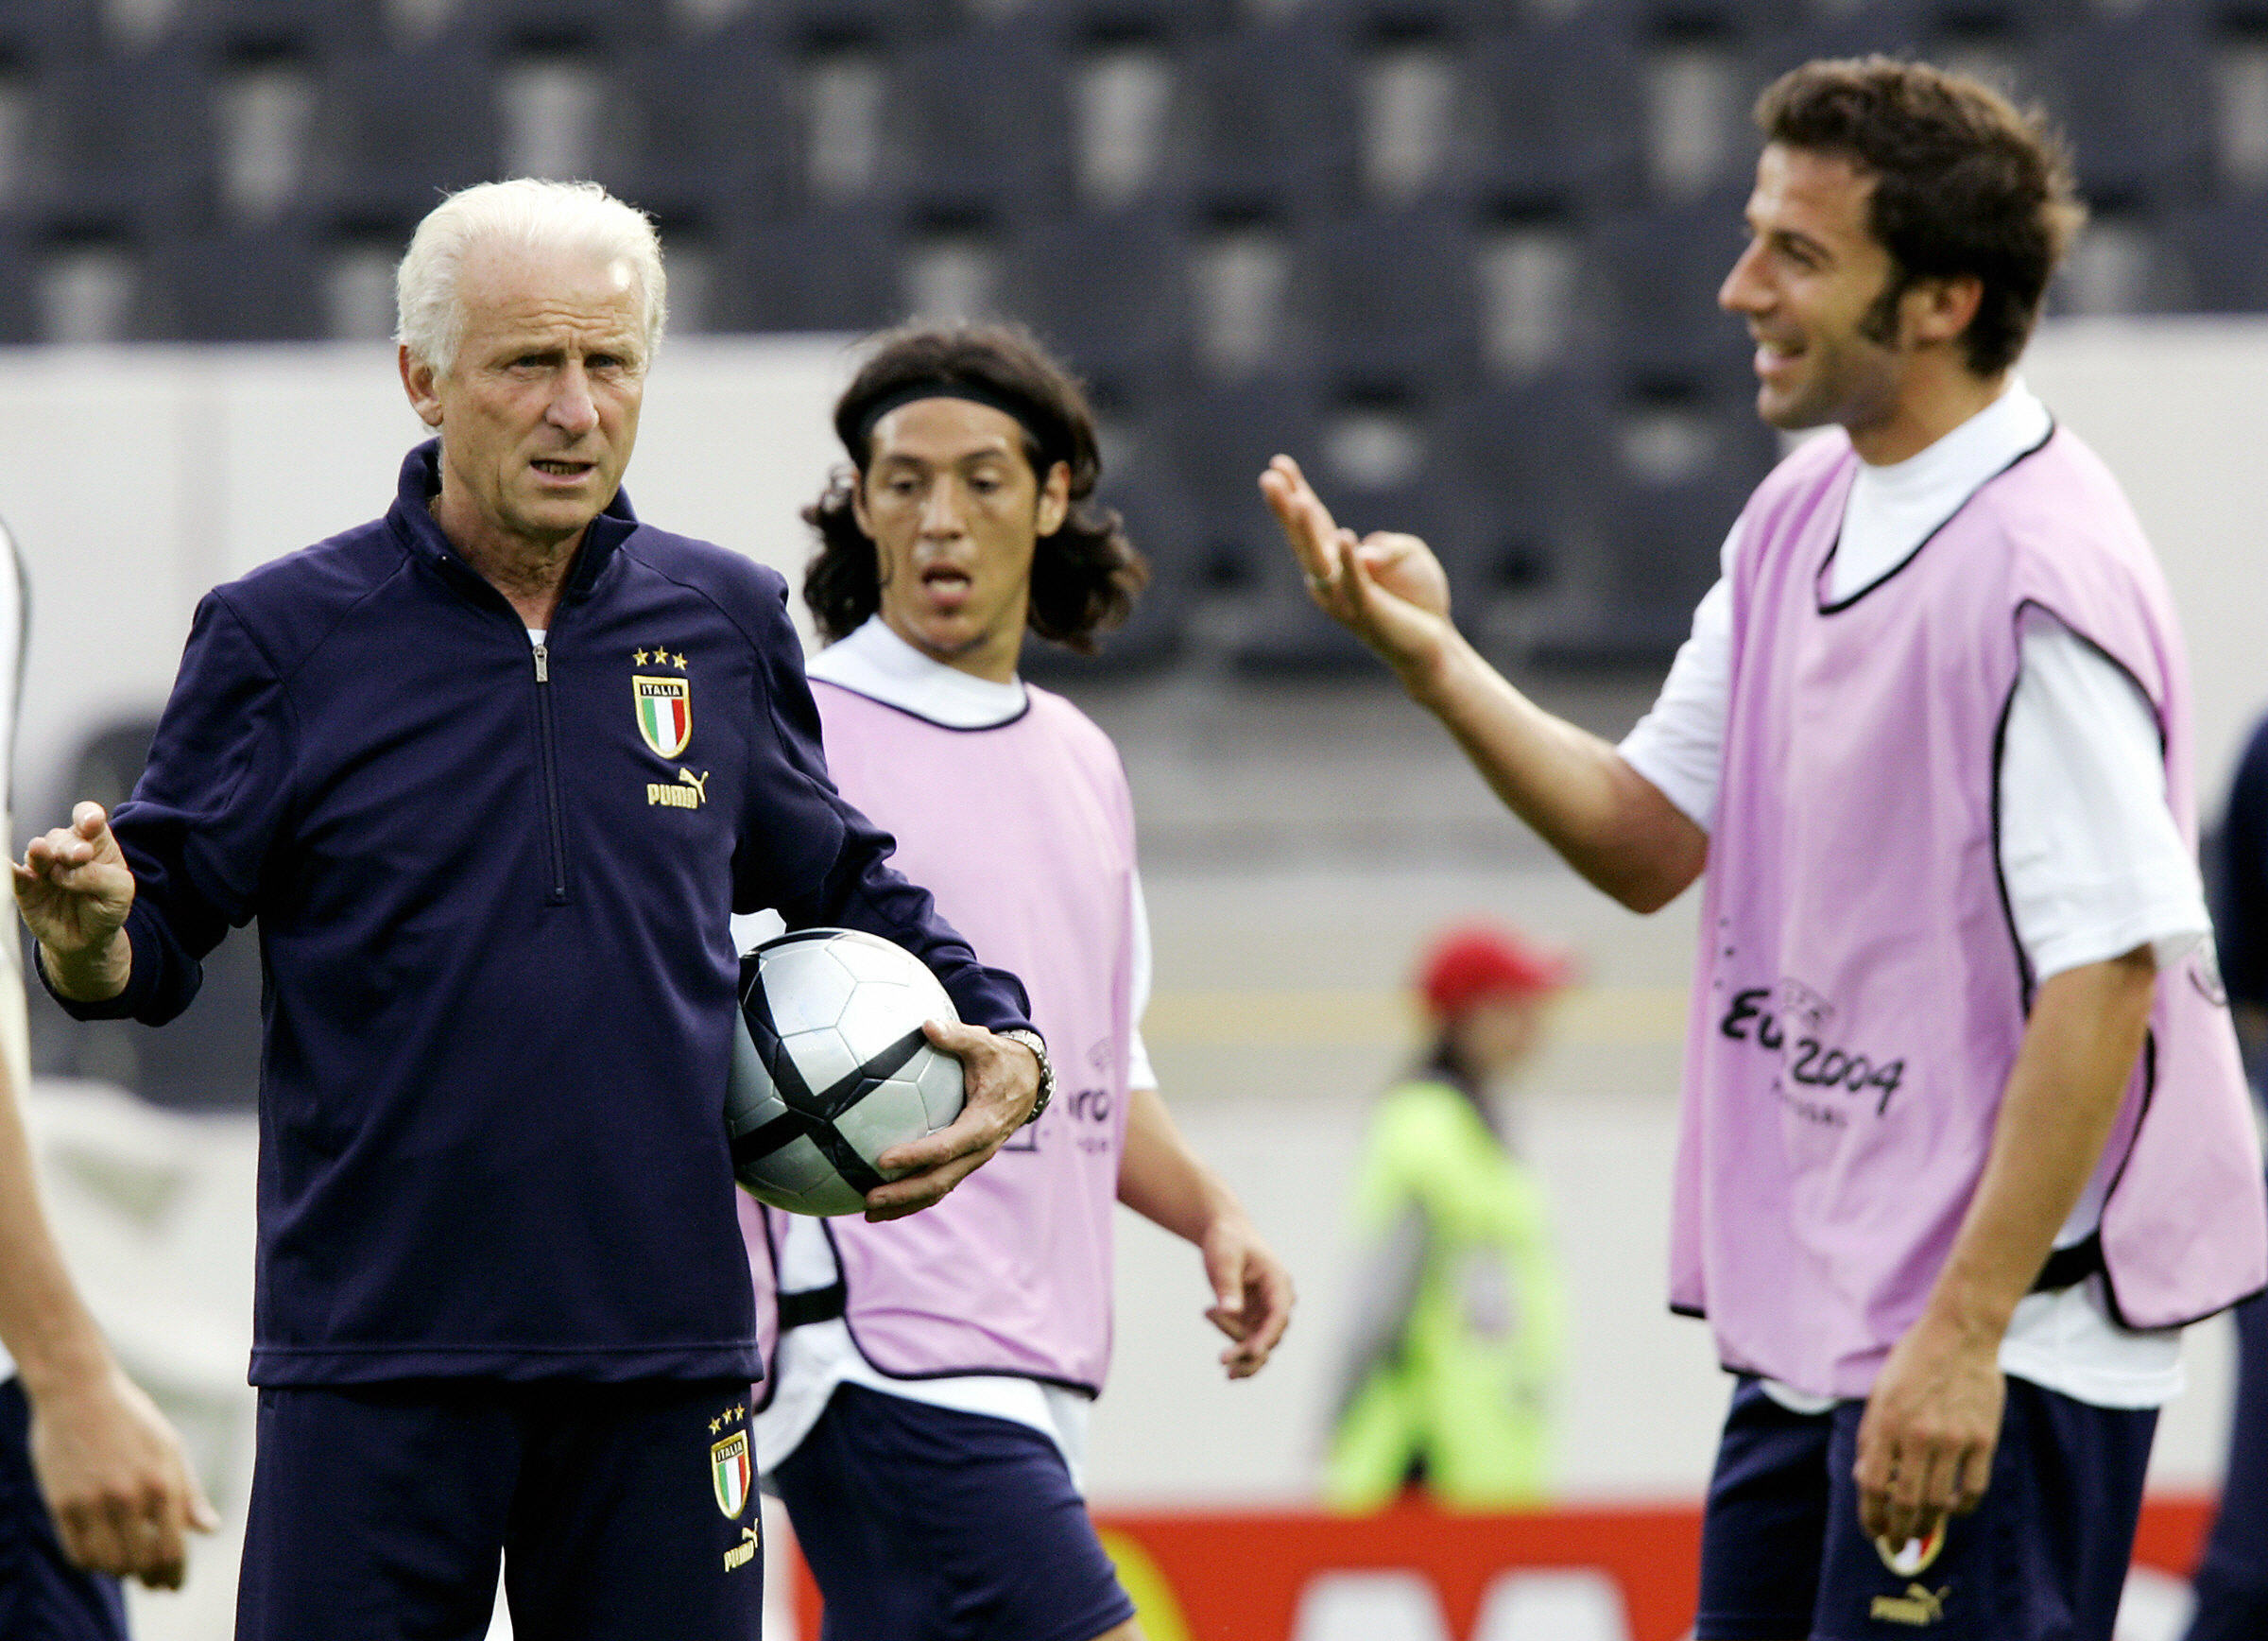 One time Italy national team coach Giovanni Trapattoni